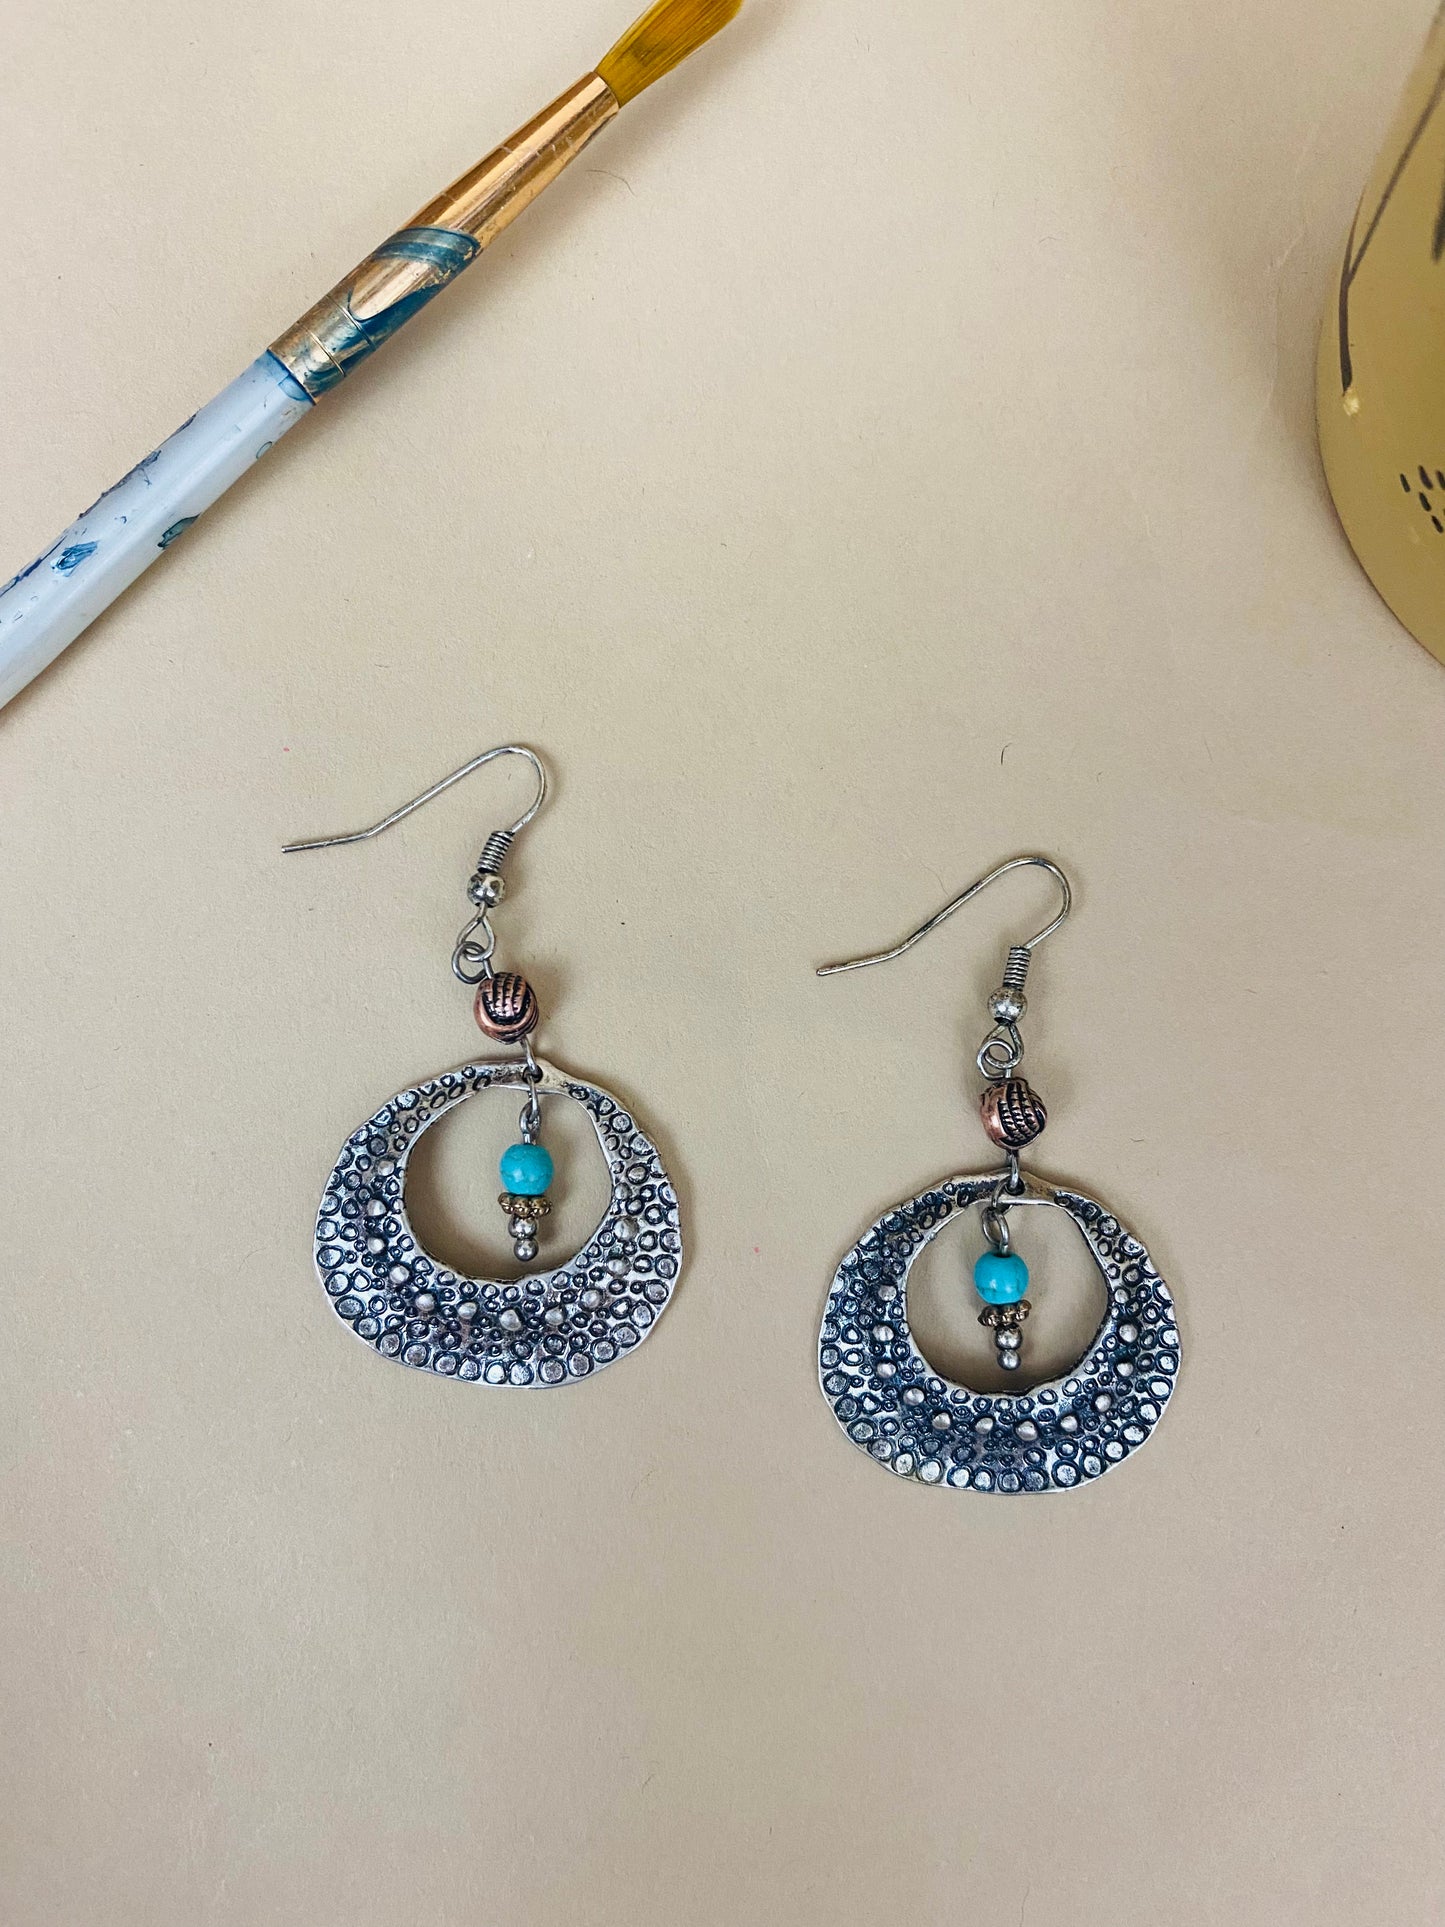 Bubbly Silver and Turquoise Drops Earrings